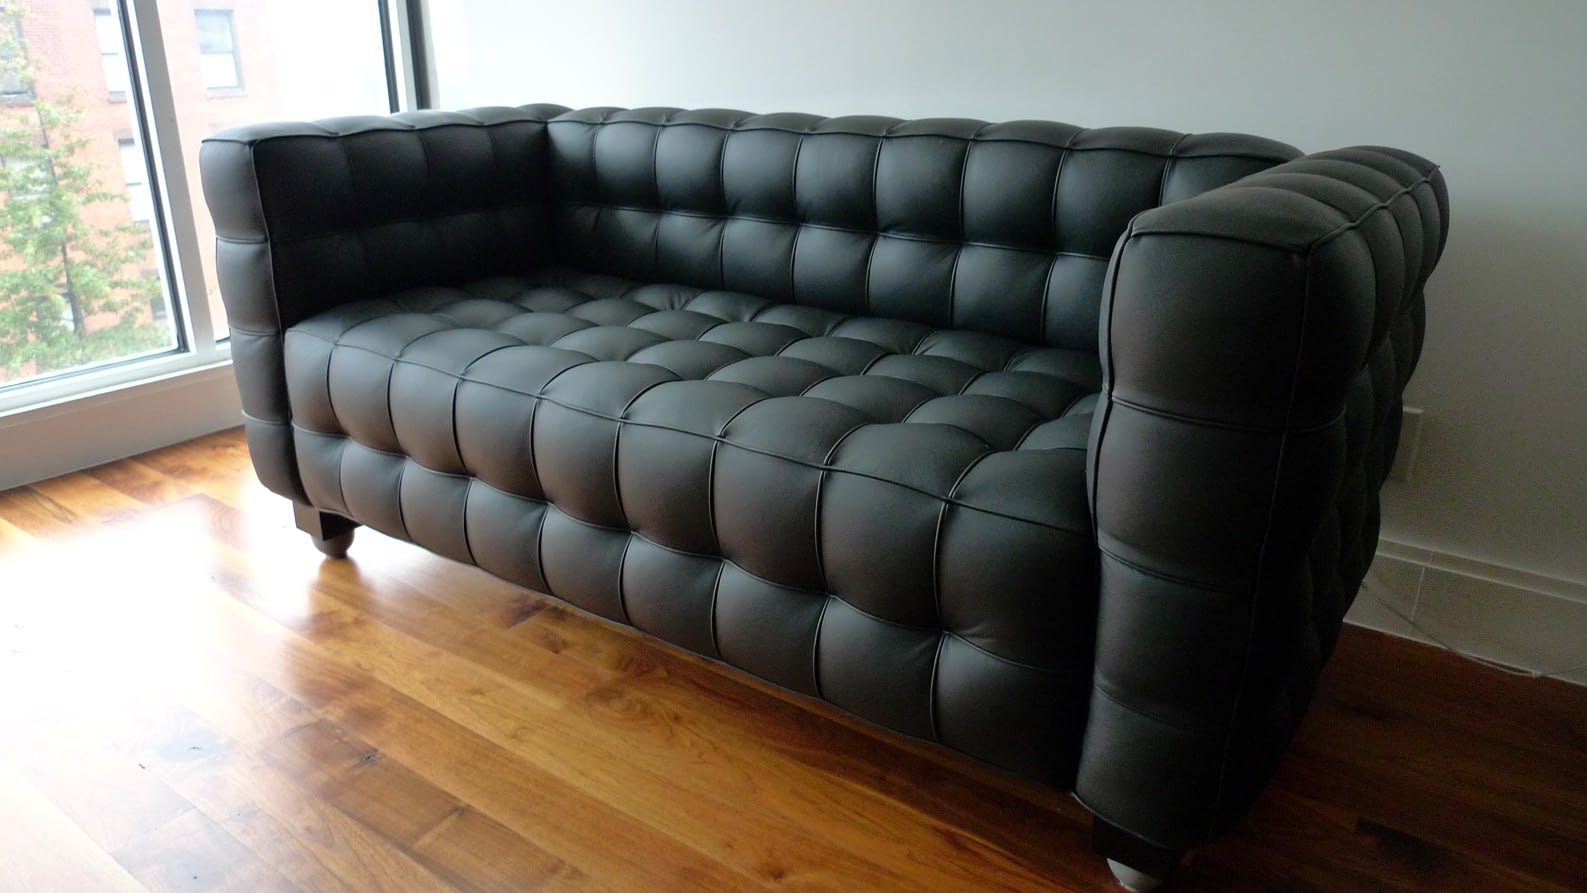 Why Is My Microfiber Couch Turning Black? - Zen Carpet Cleaning